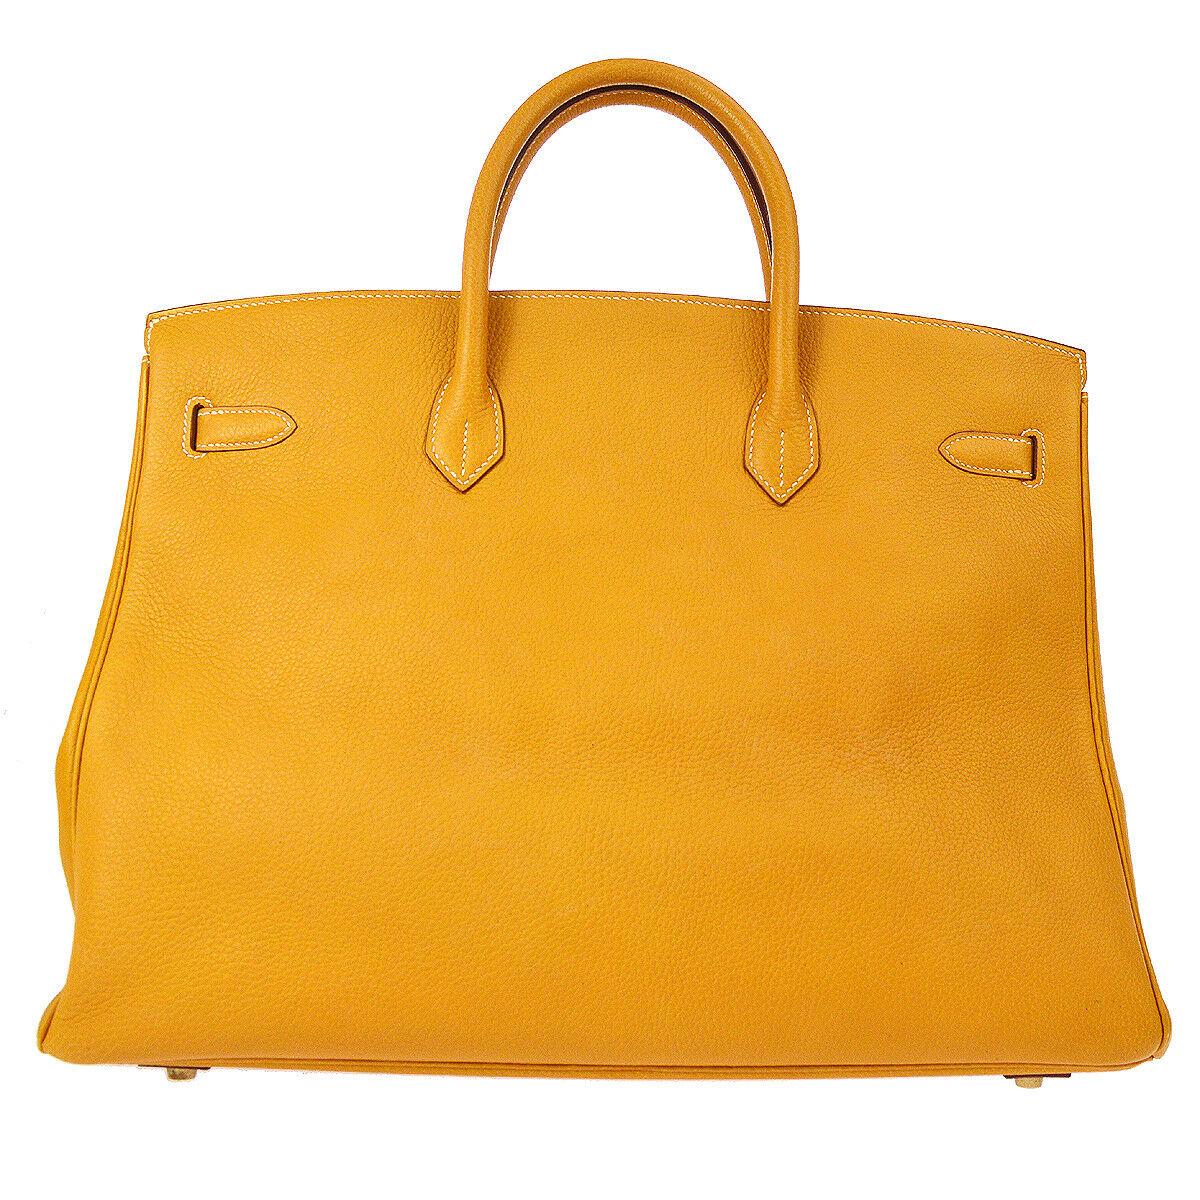 Hermes Birkin 40 Yellow Leather Gold Travel Carryall Top Handle Satchel Tote In Good Condition In Chicago, IL